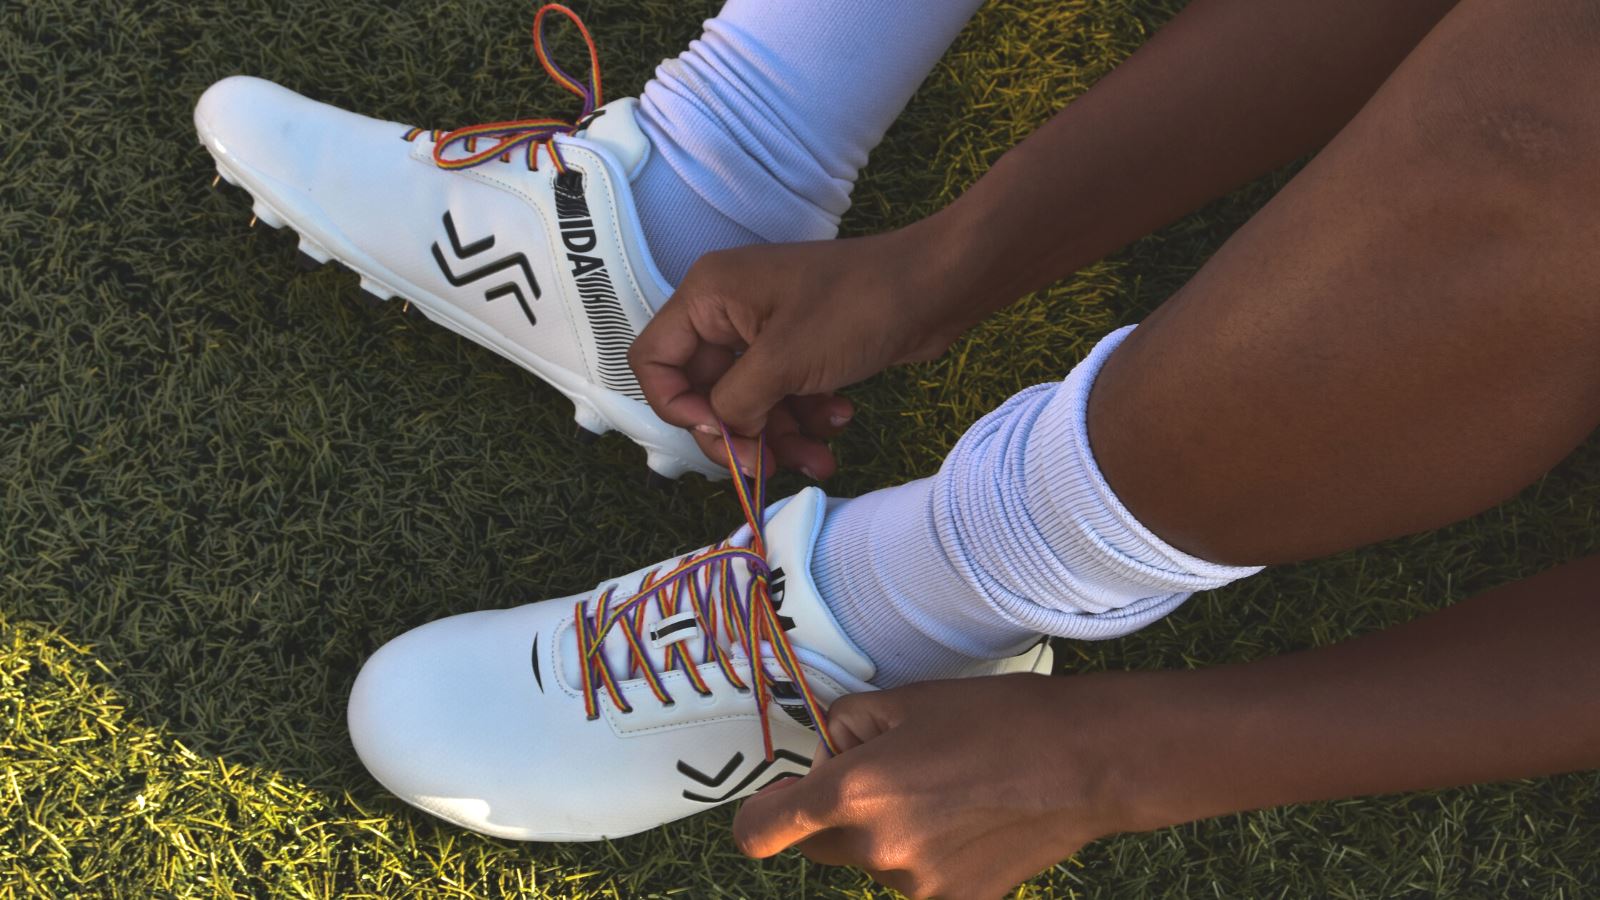 How to Treat Blisters from Soccer Cleats